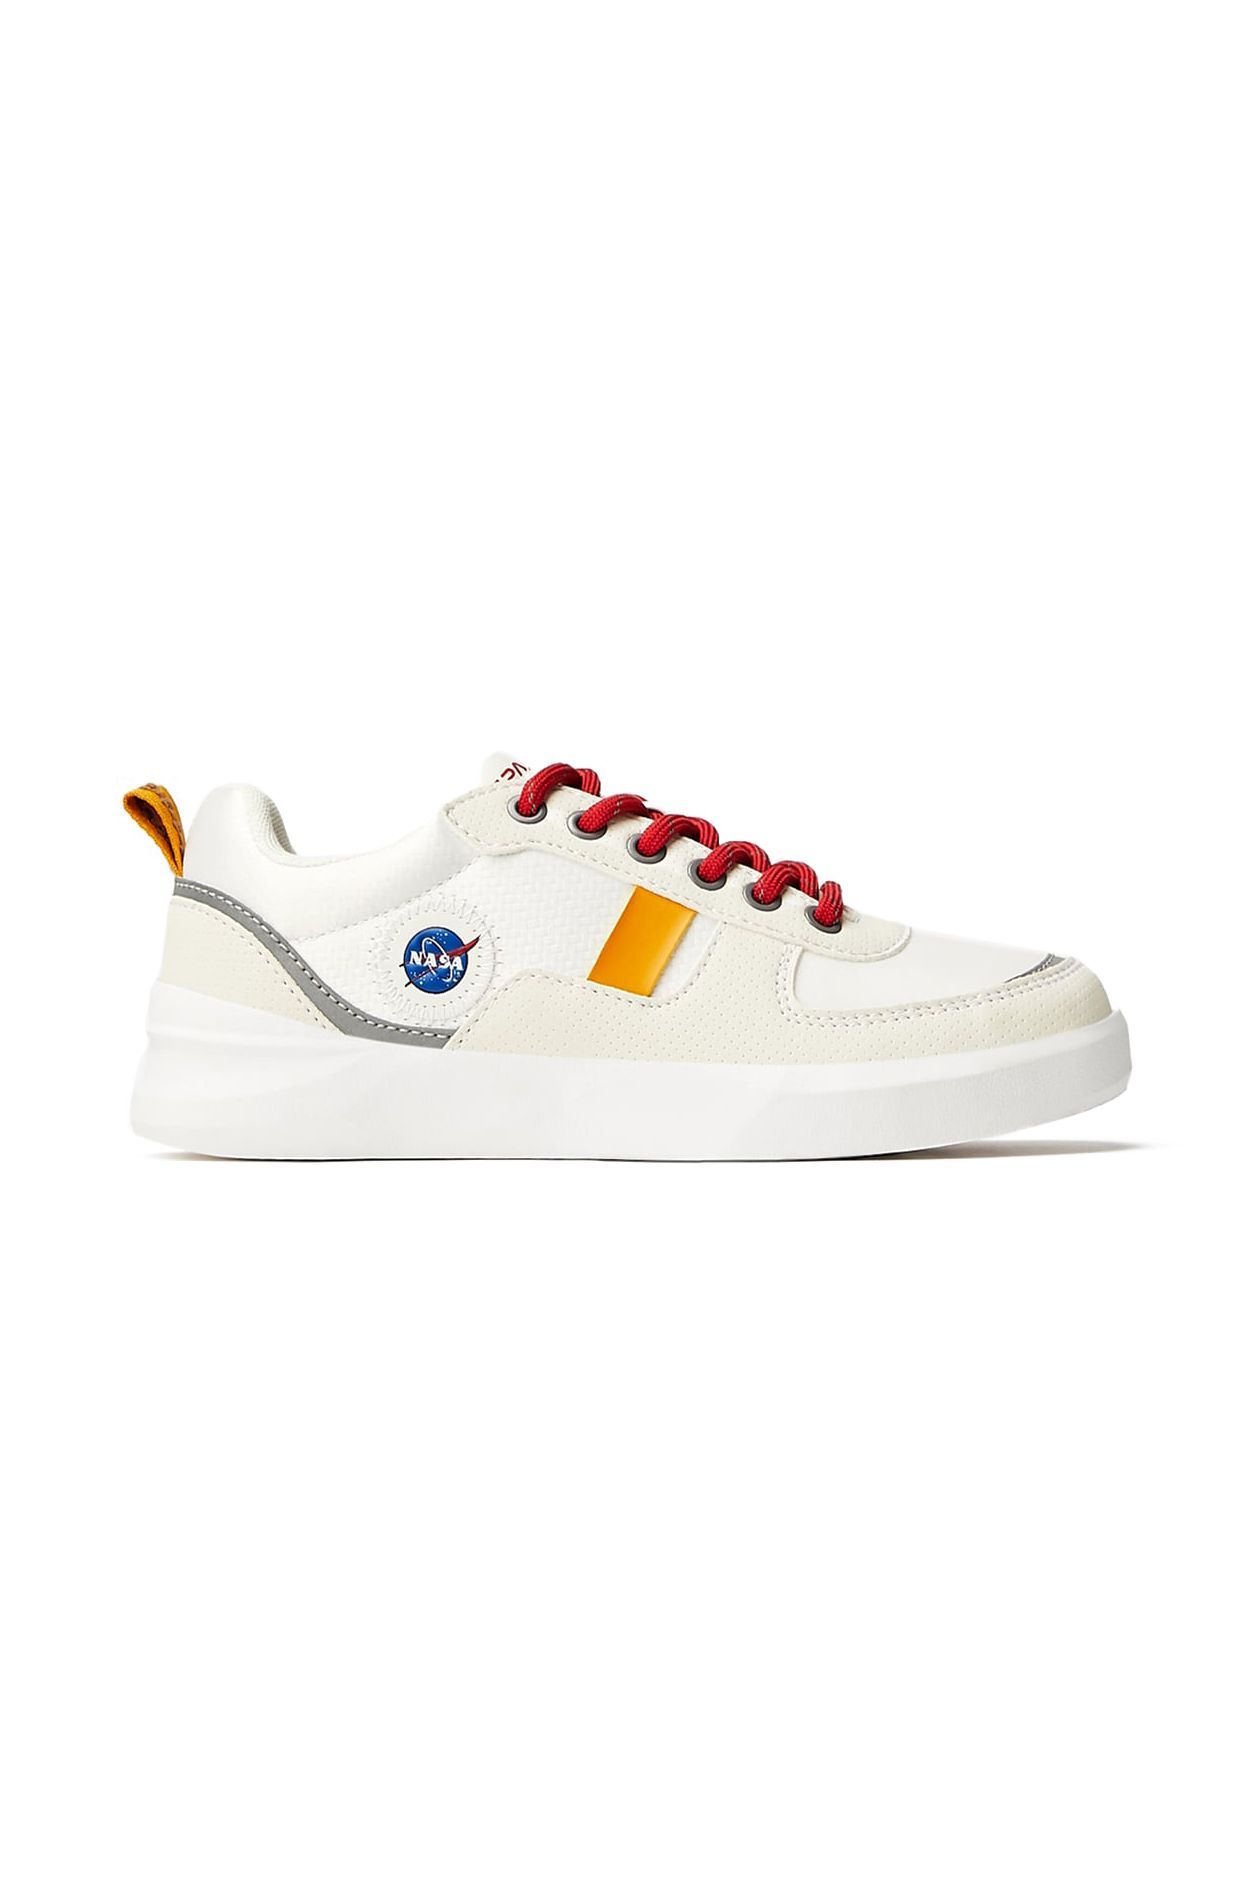 shoes that just came out 2019